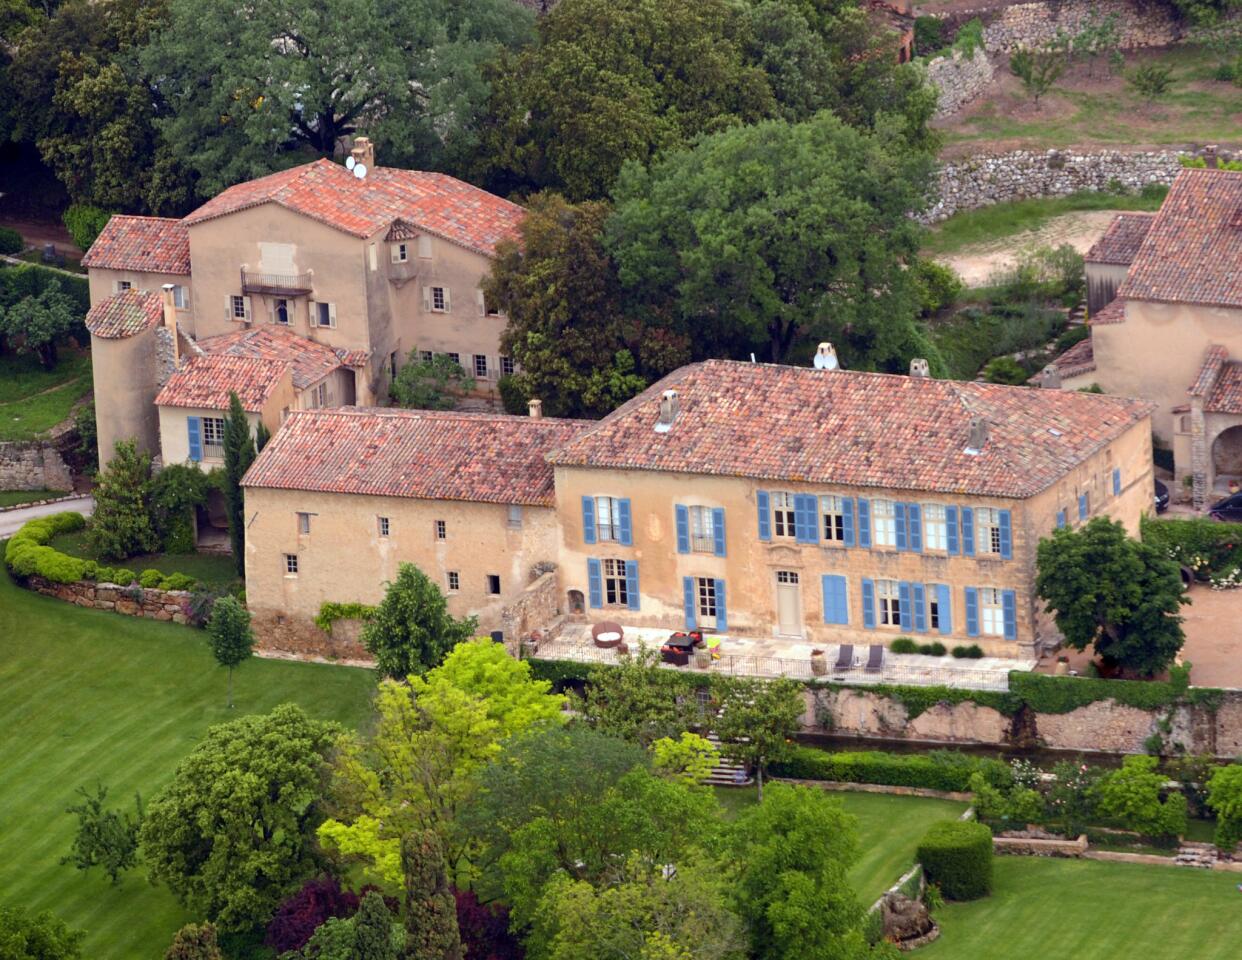 Brangelina chose Chateau Miraval, the family's estate in France. The ancient stone chapel on the property was the perfect location for an intimate ceremony.